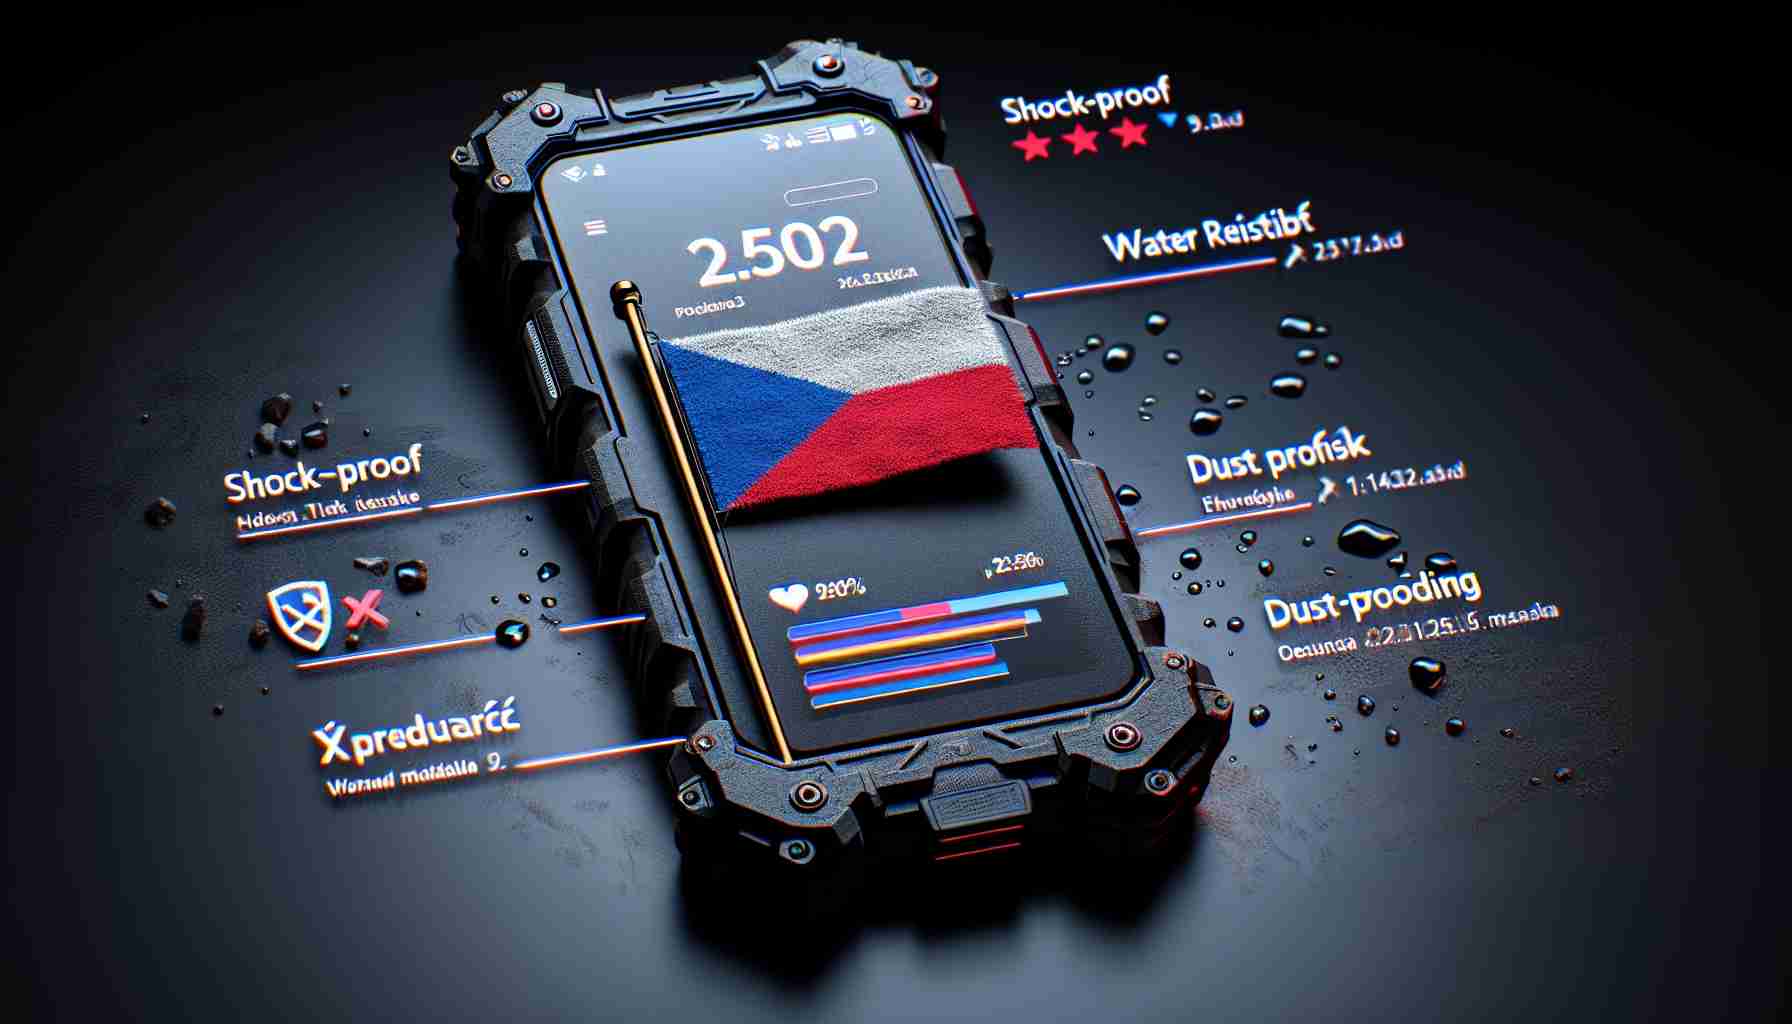 New Rugged Smartphone Enters Czech Market with Steep Price Tag